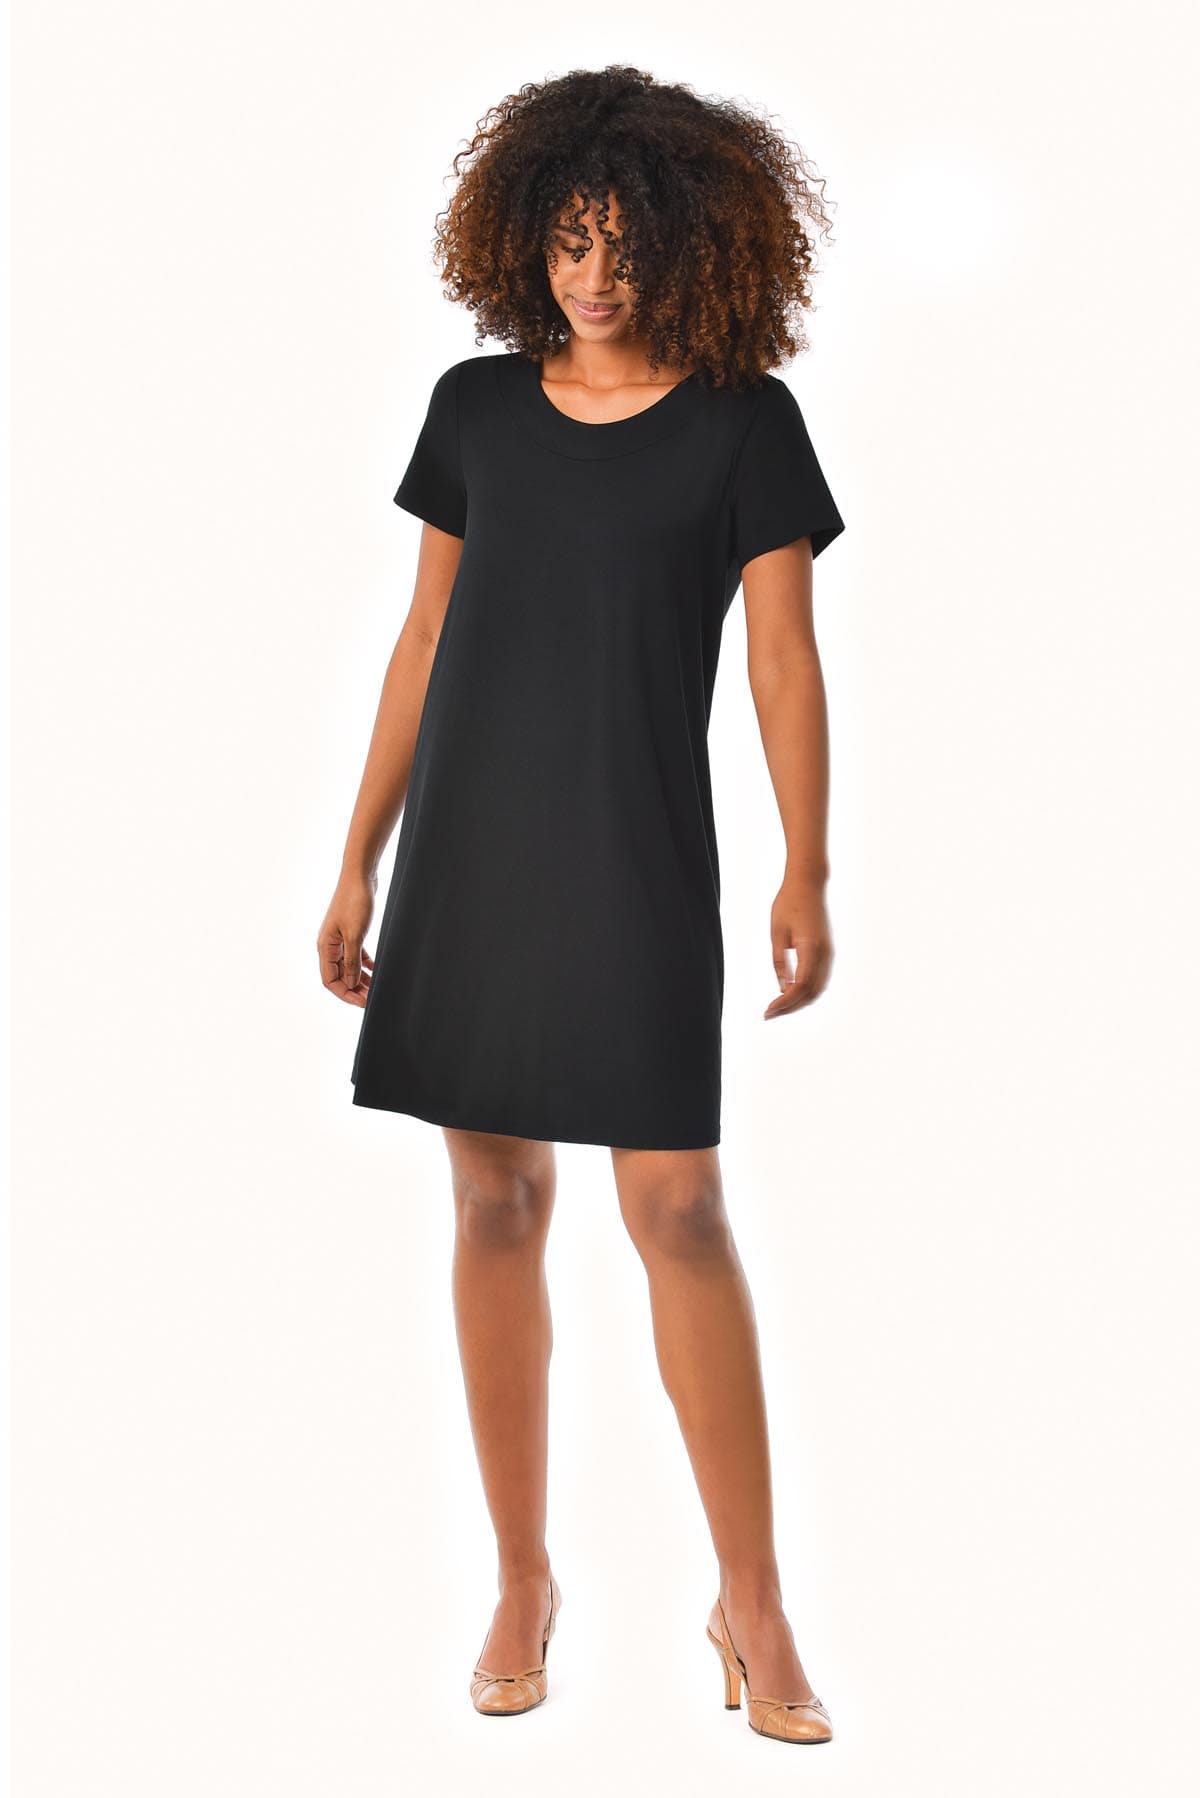 petite robe noire made in france Zola - Thelma Rose